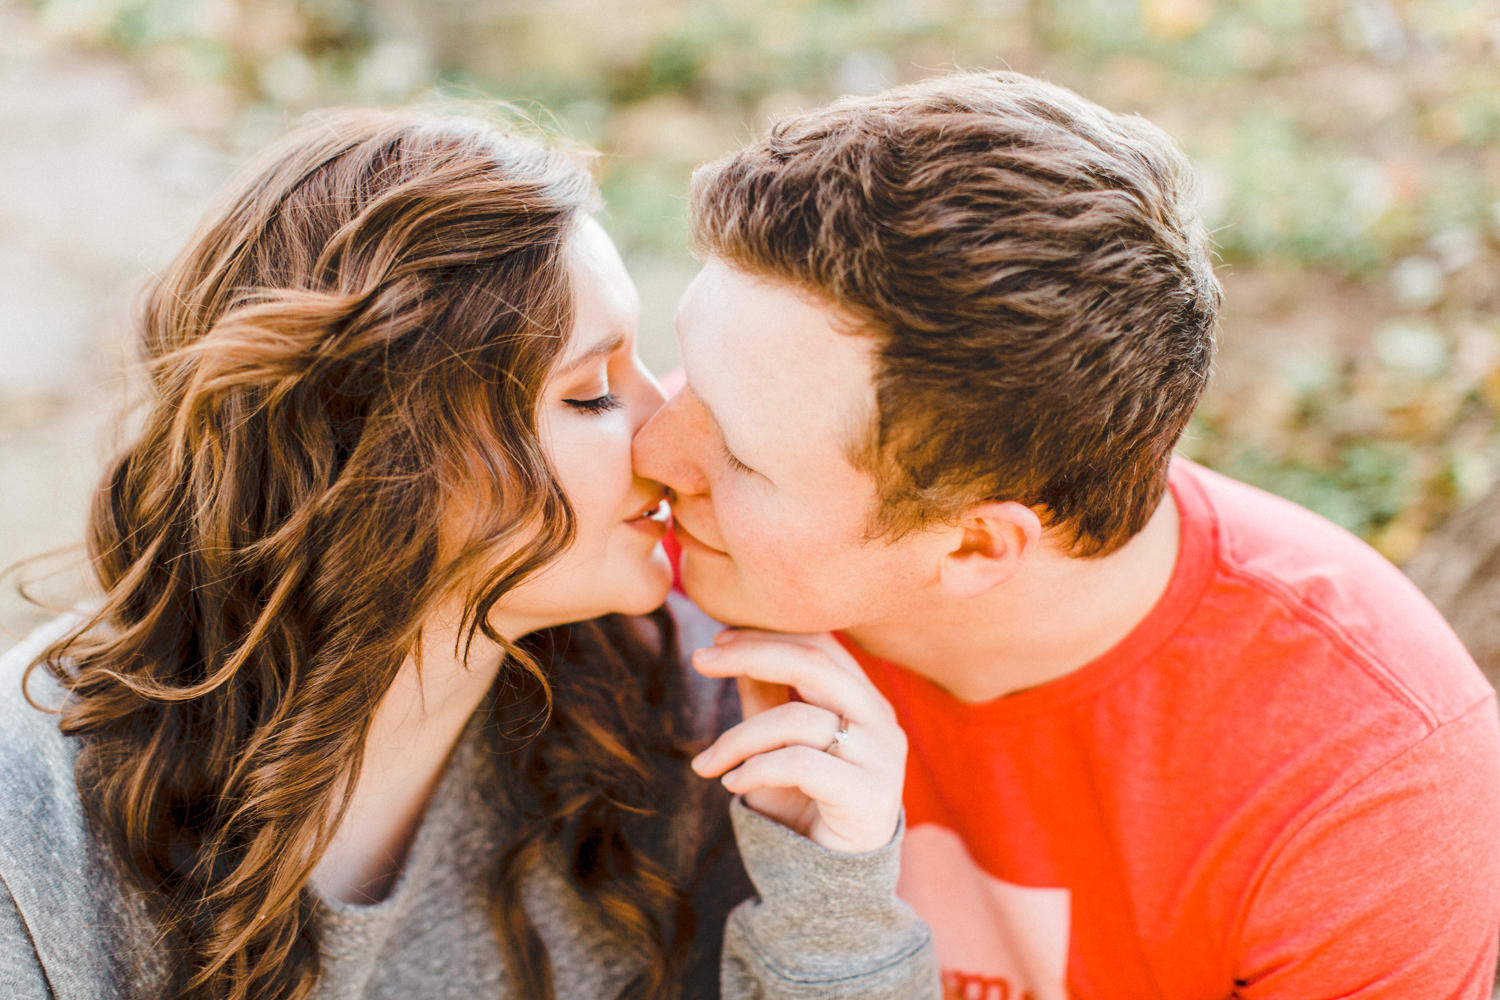 fall engagement photos at overlook park in newburgh, IN